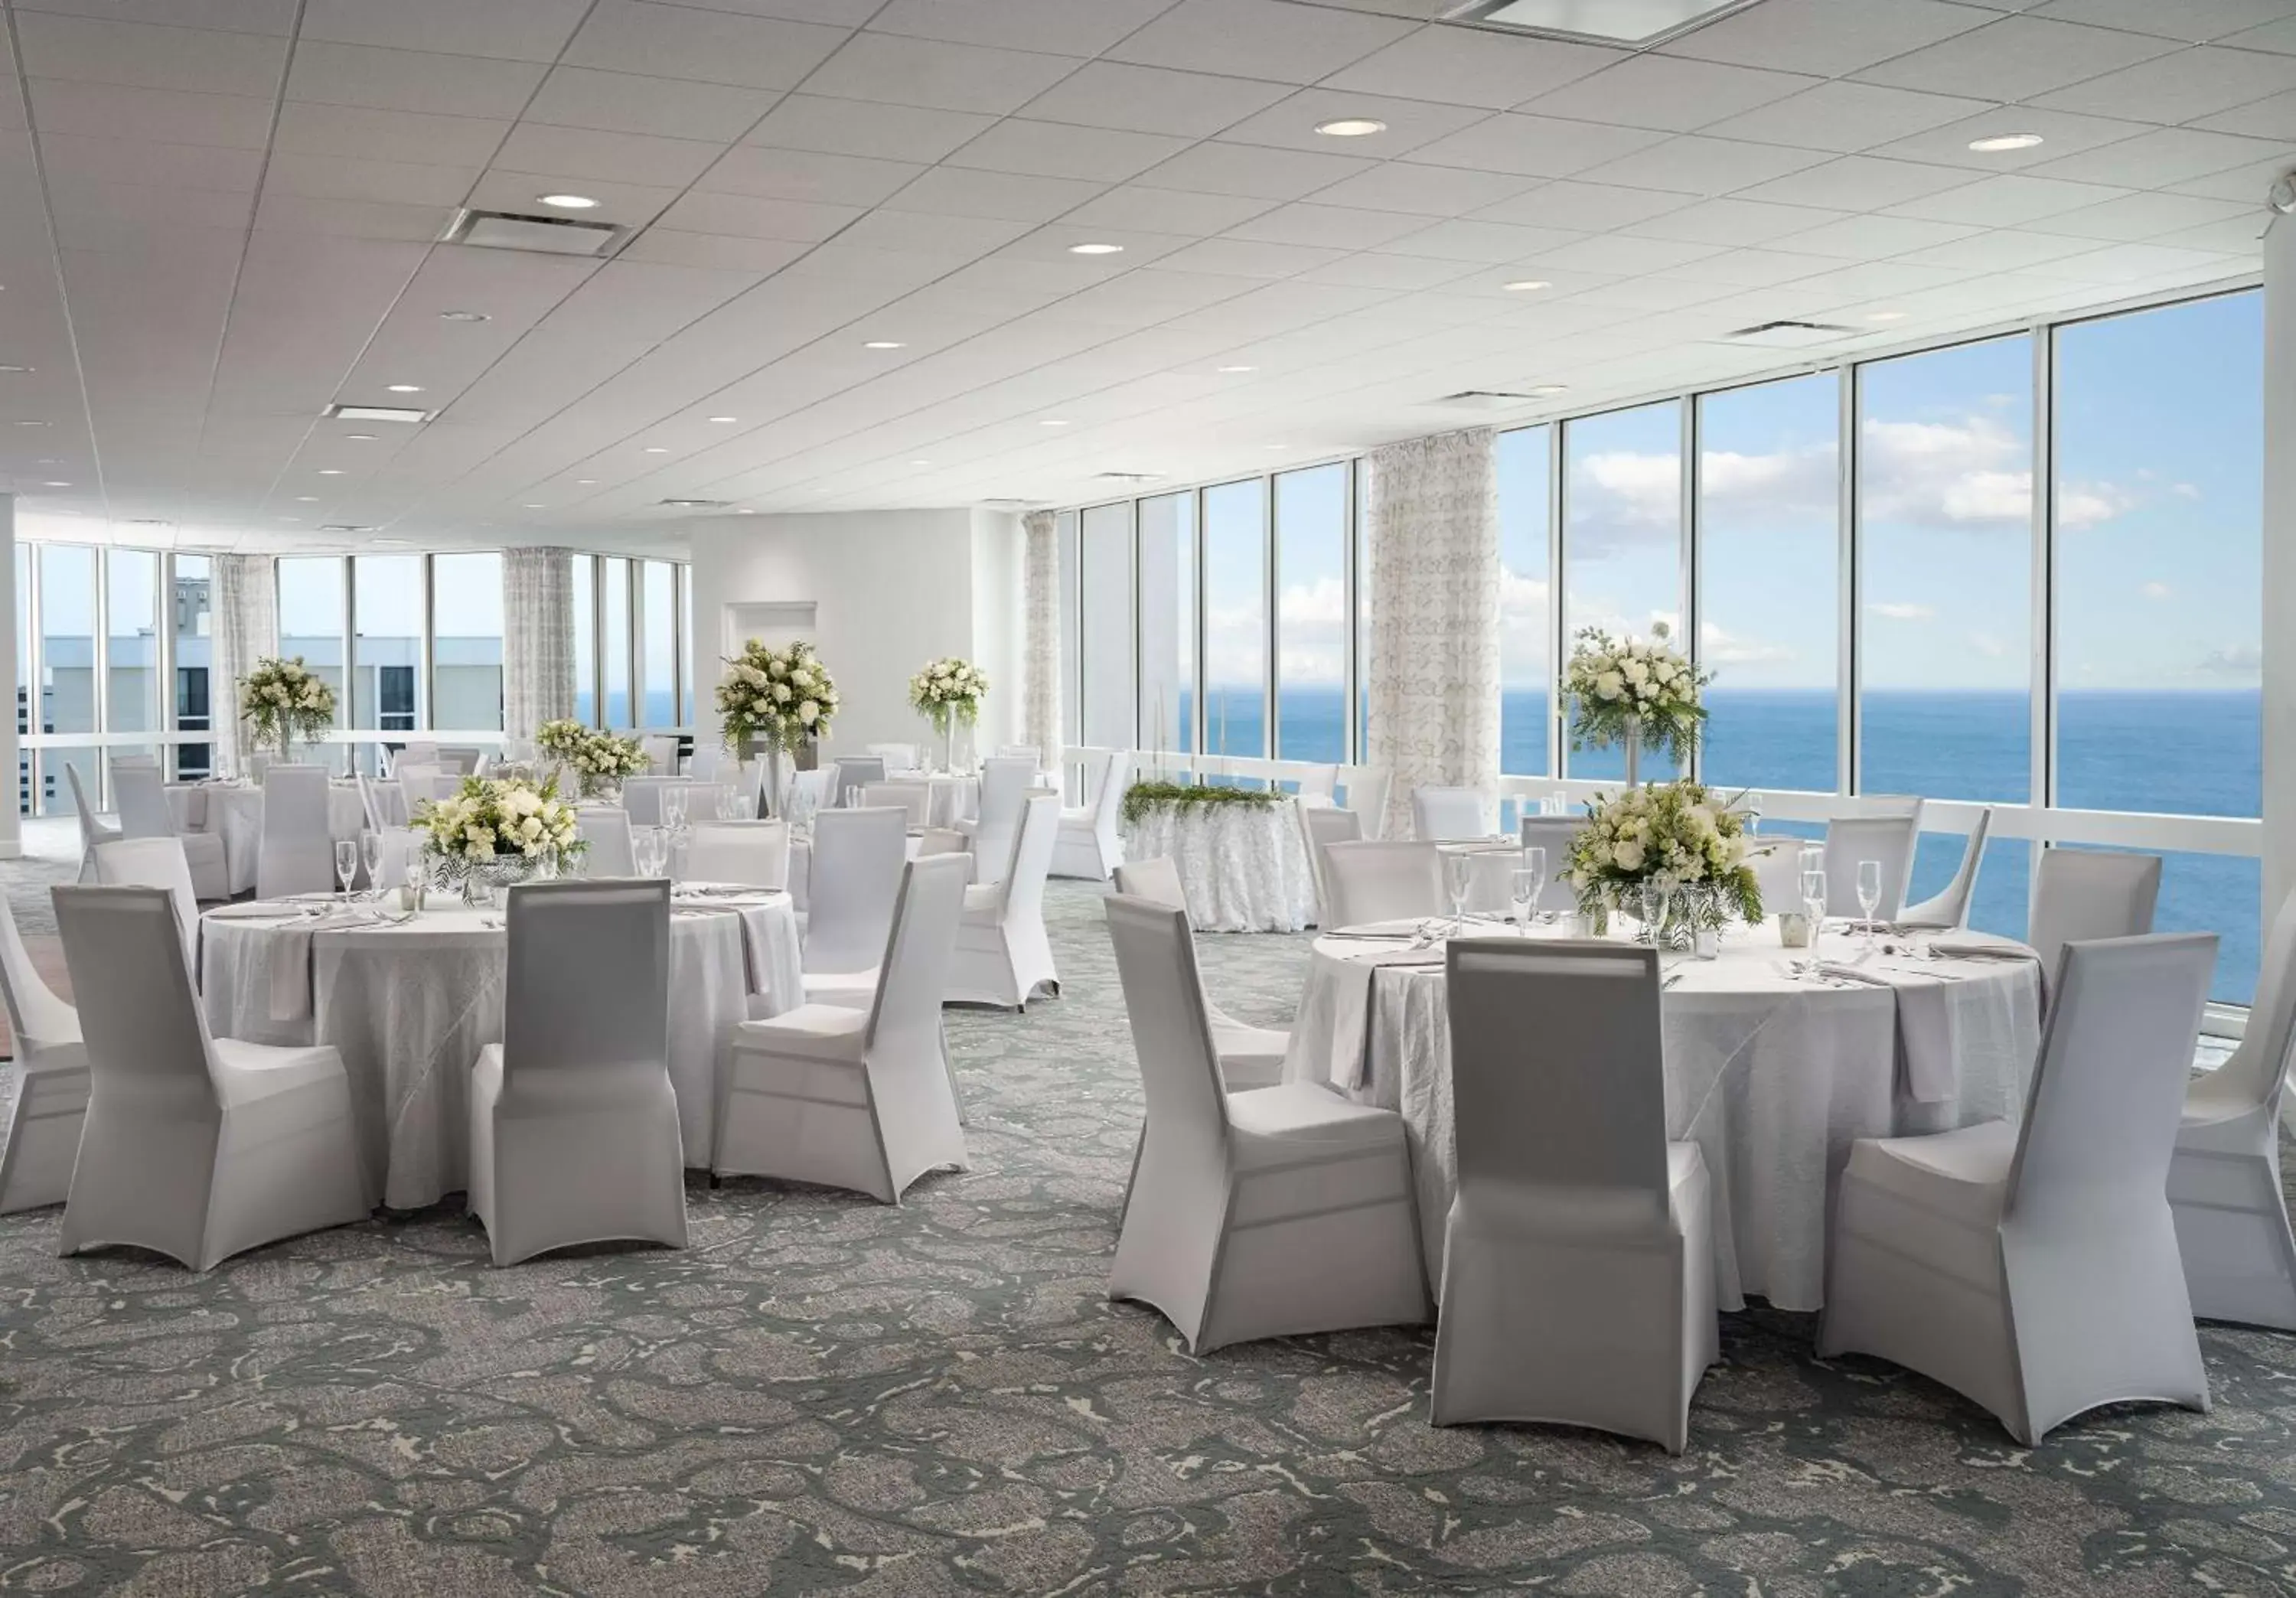 Meeting/conference room, Banquet Facilities in Hilton Myrtle Beach Resort